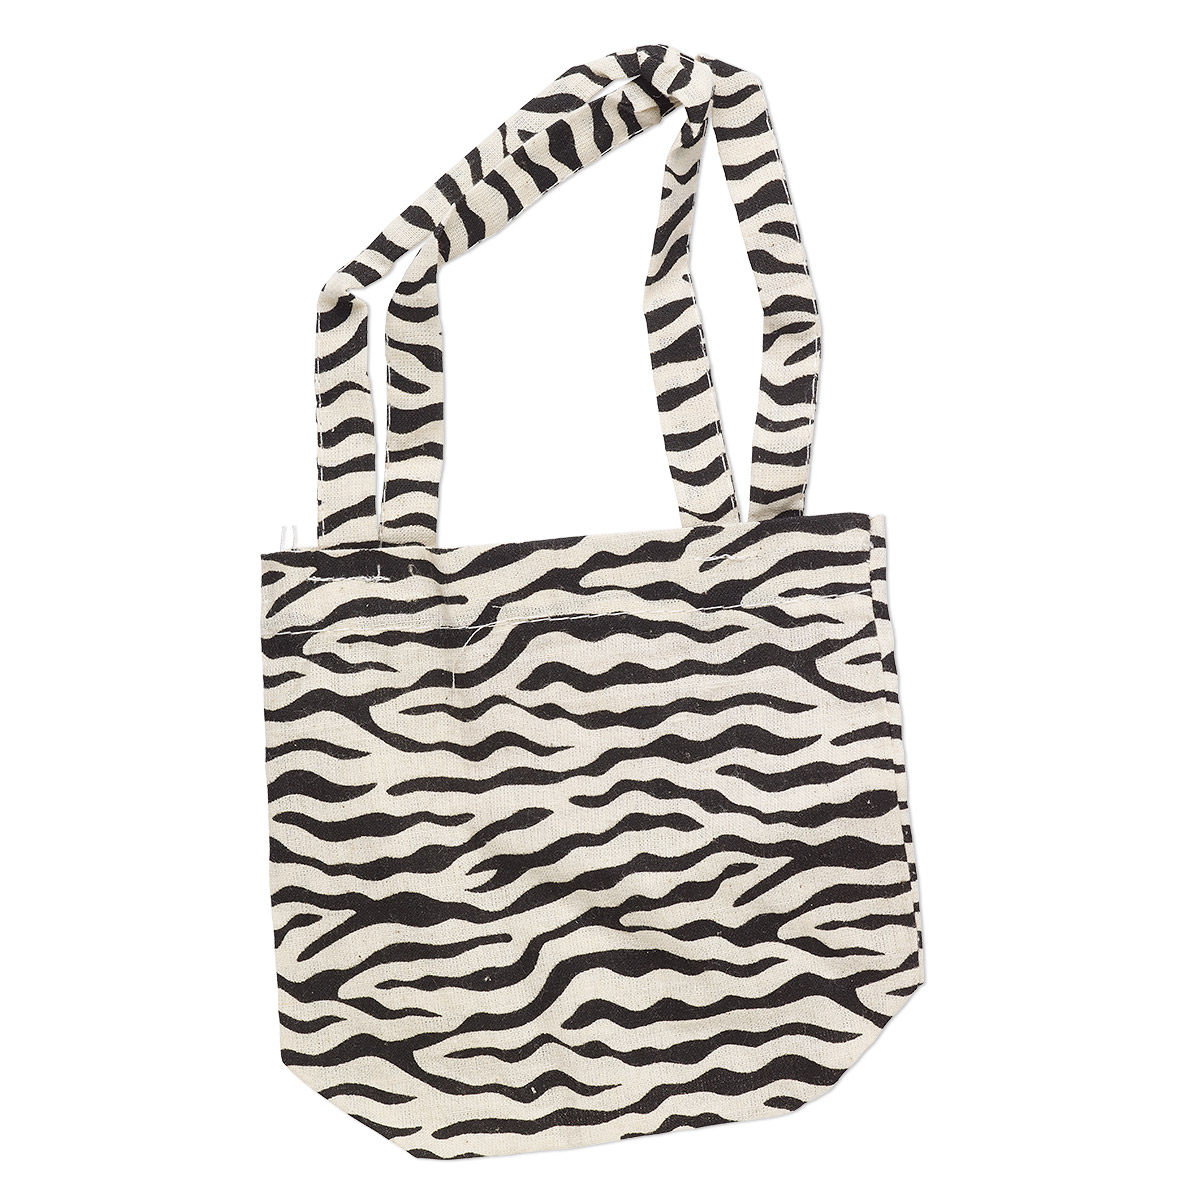 Pouch, cotton, natural and black, 5-inch square with zebra print design ...